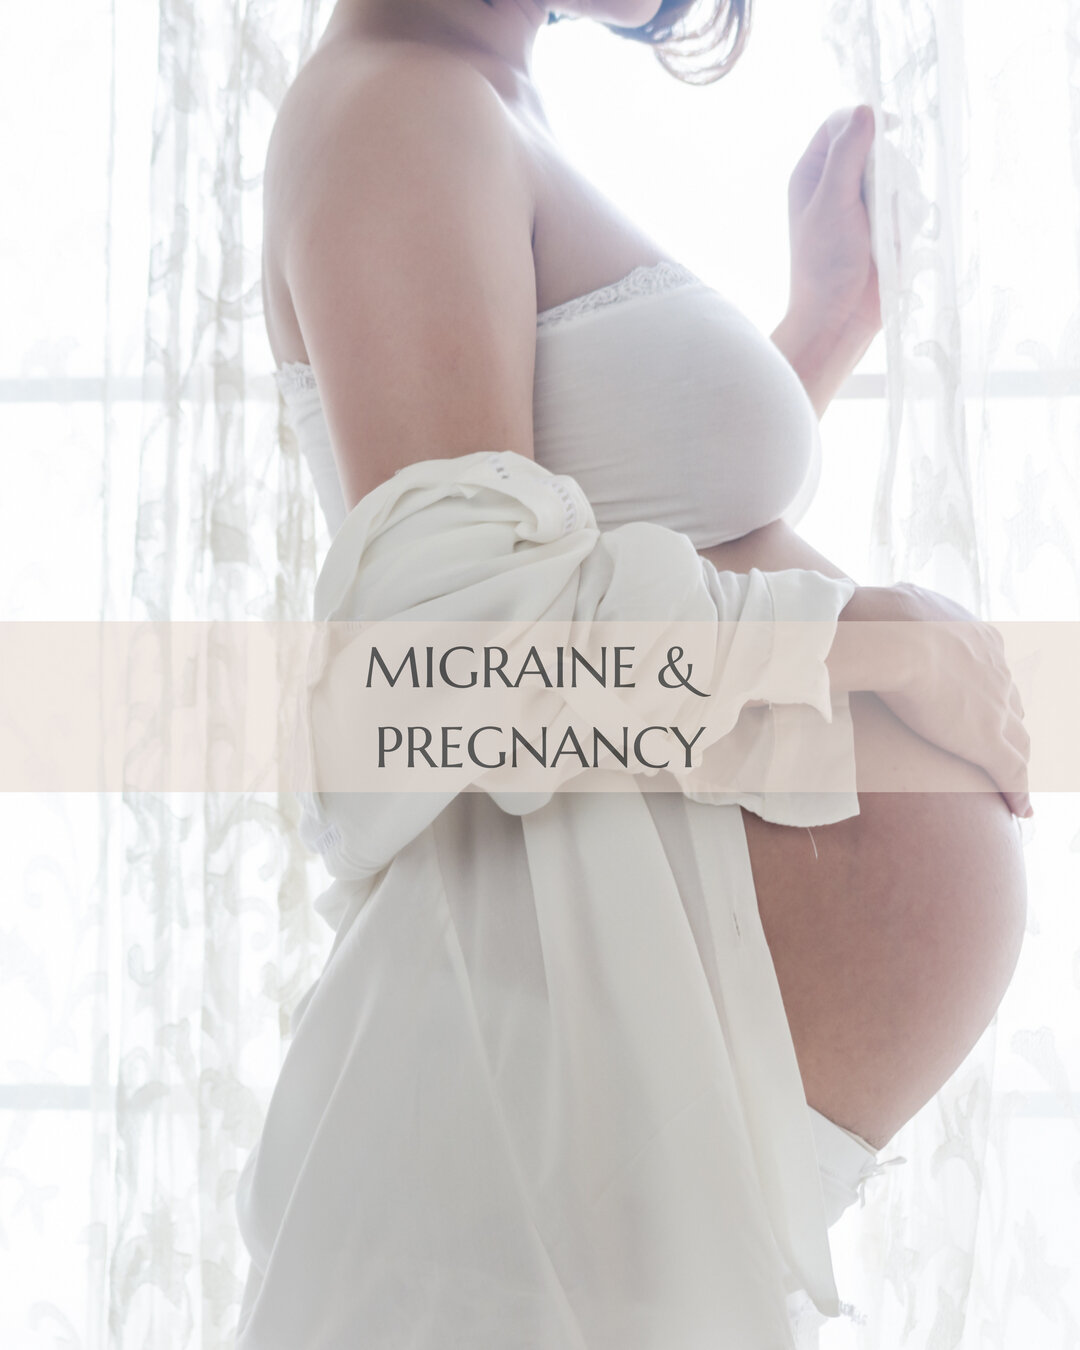 I tallied your votes, and the results are in! Please join me for my next series on the relationship between migraine and pregnancy. ​​​​​​​​
​​​​​​​​
Many people typically wonder if the effects of migraine worsen during pregnancy, and surprisingly, t